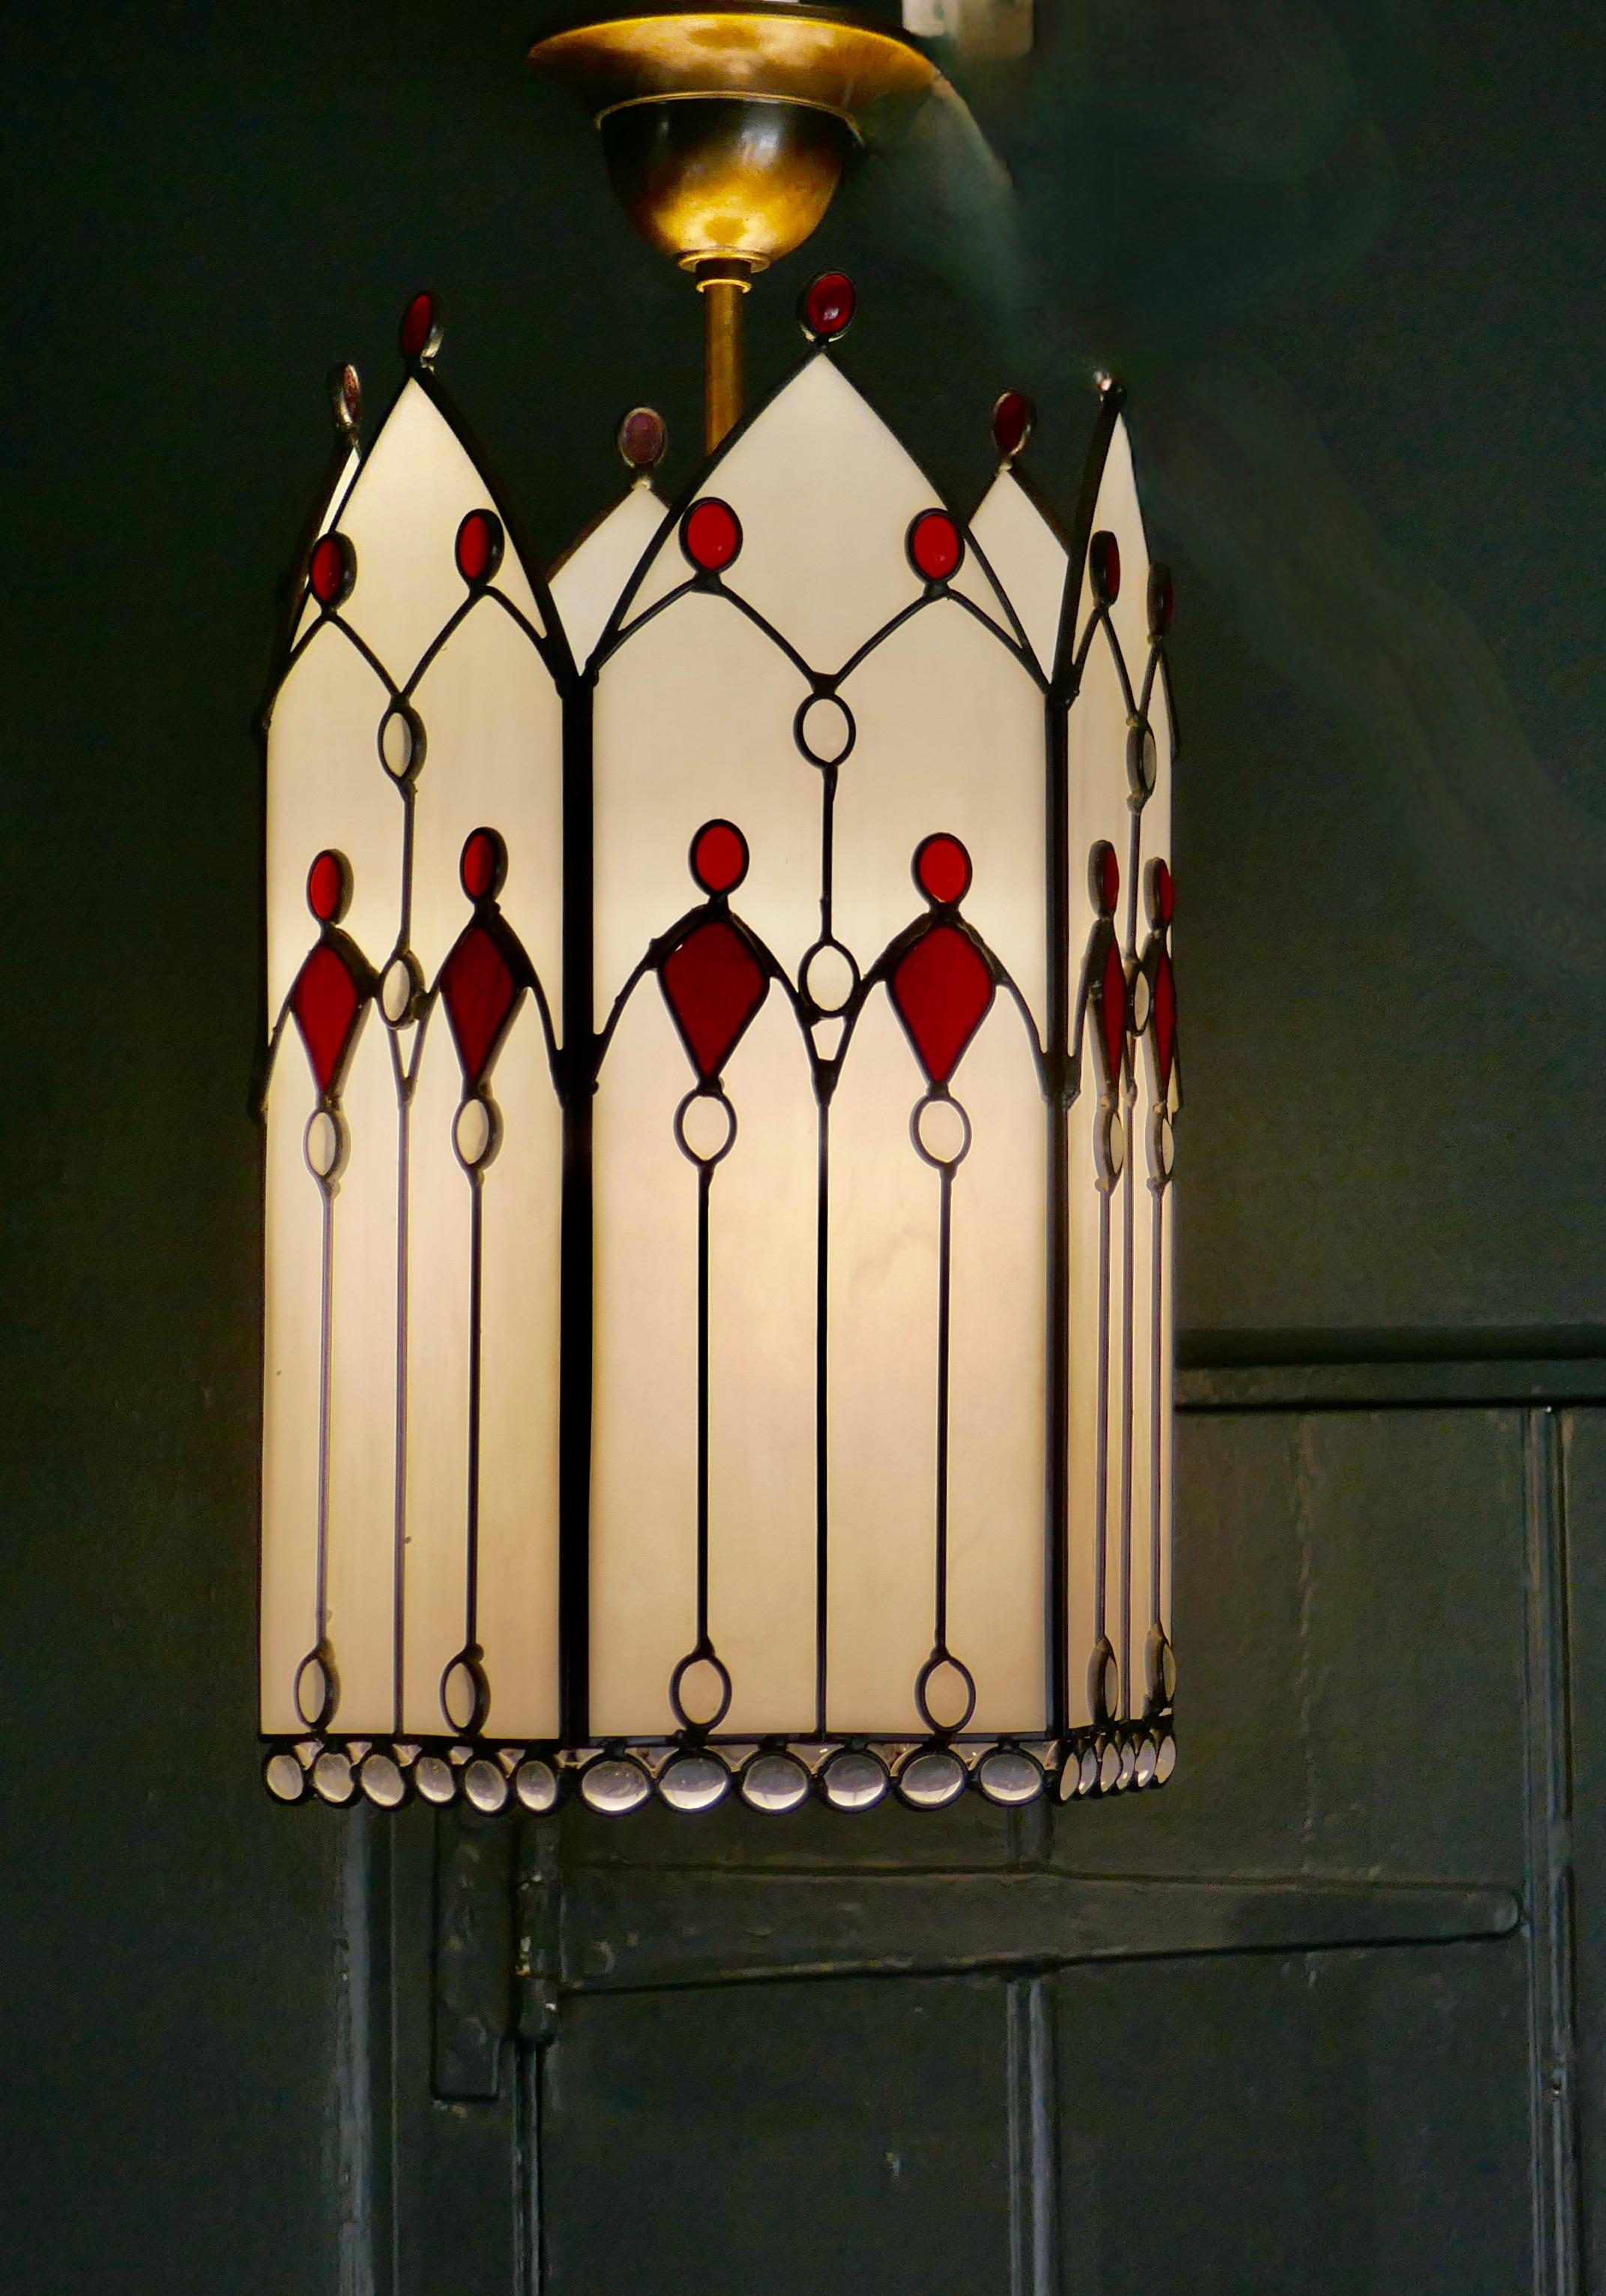 Large Arts and Crafts Stained Glass Hall Lantern Ceiling Light

This Large Hall Lantern is of Classic Arts and Crafts design, it has opaque leaded glass panels set with opaline and ruby glass into each of its 6 sides at the top of each there is